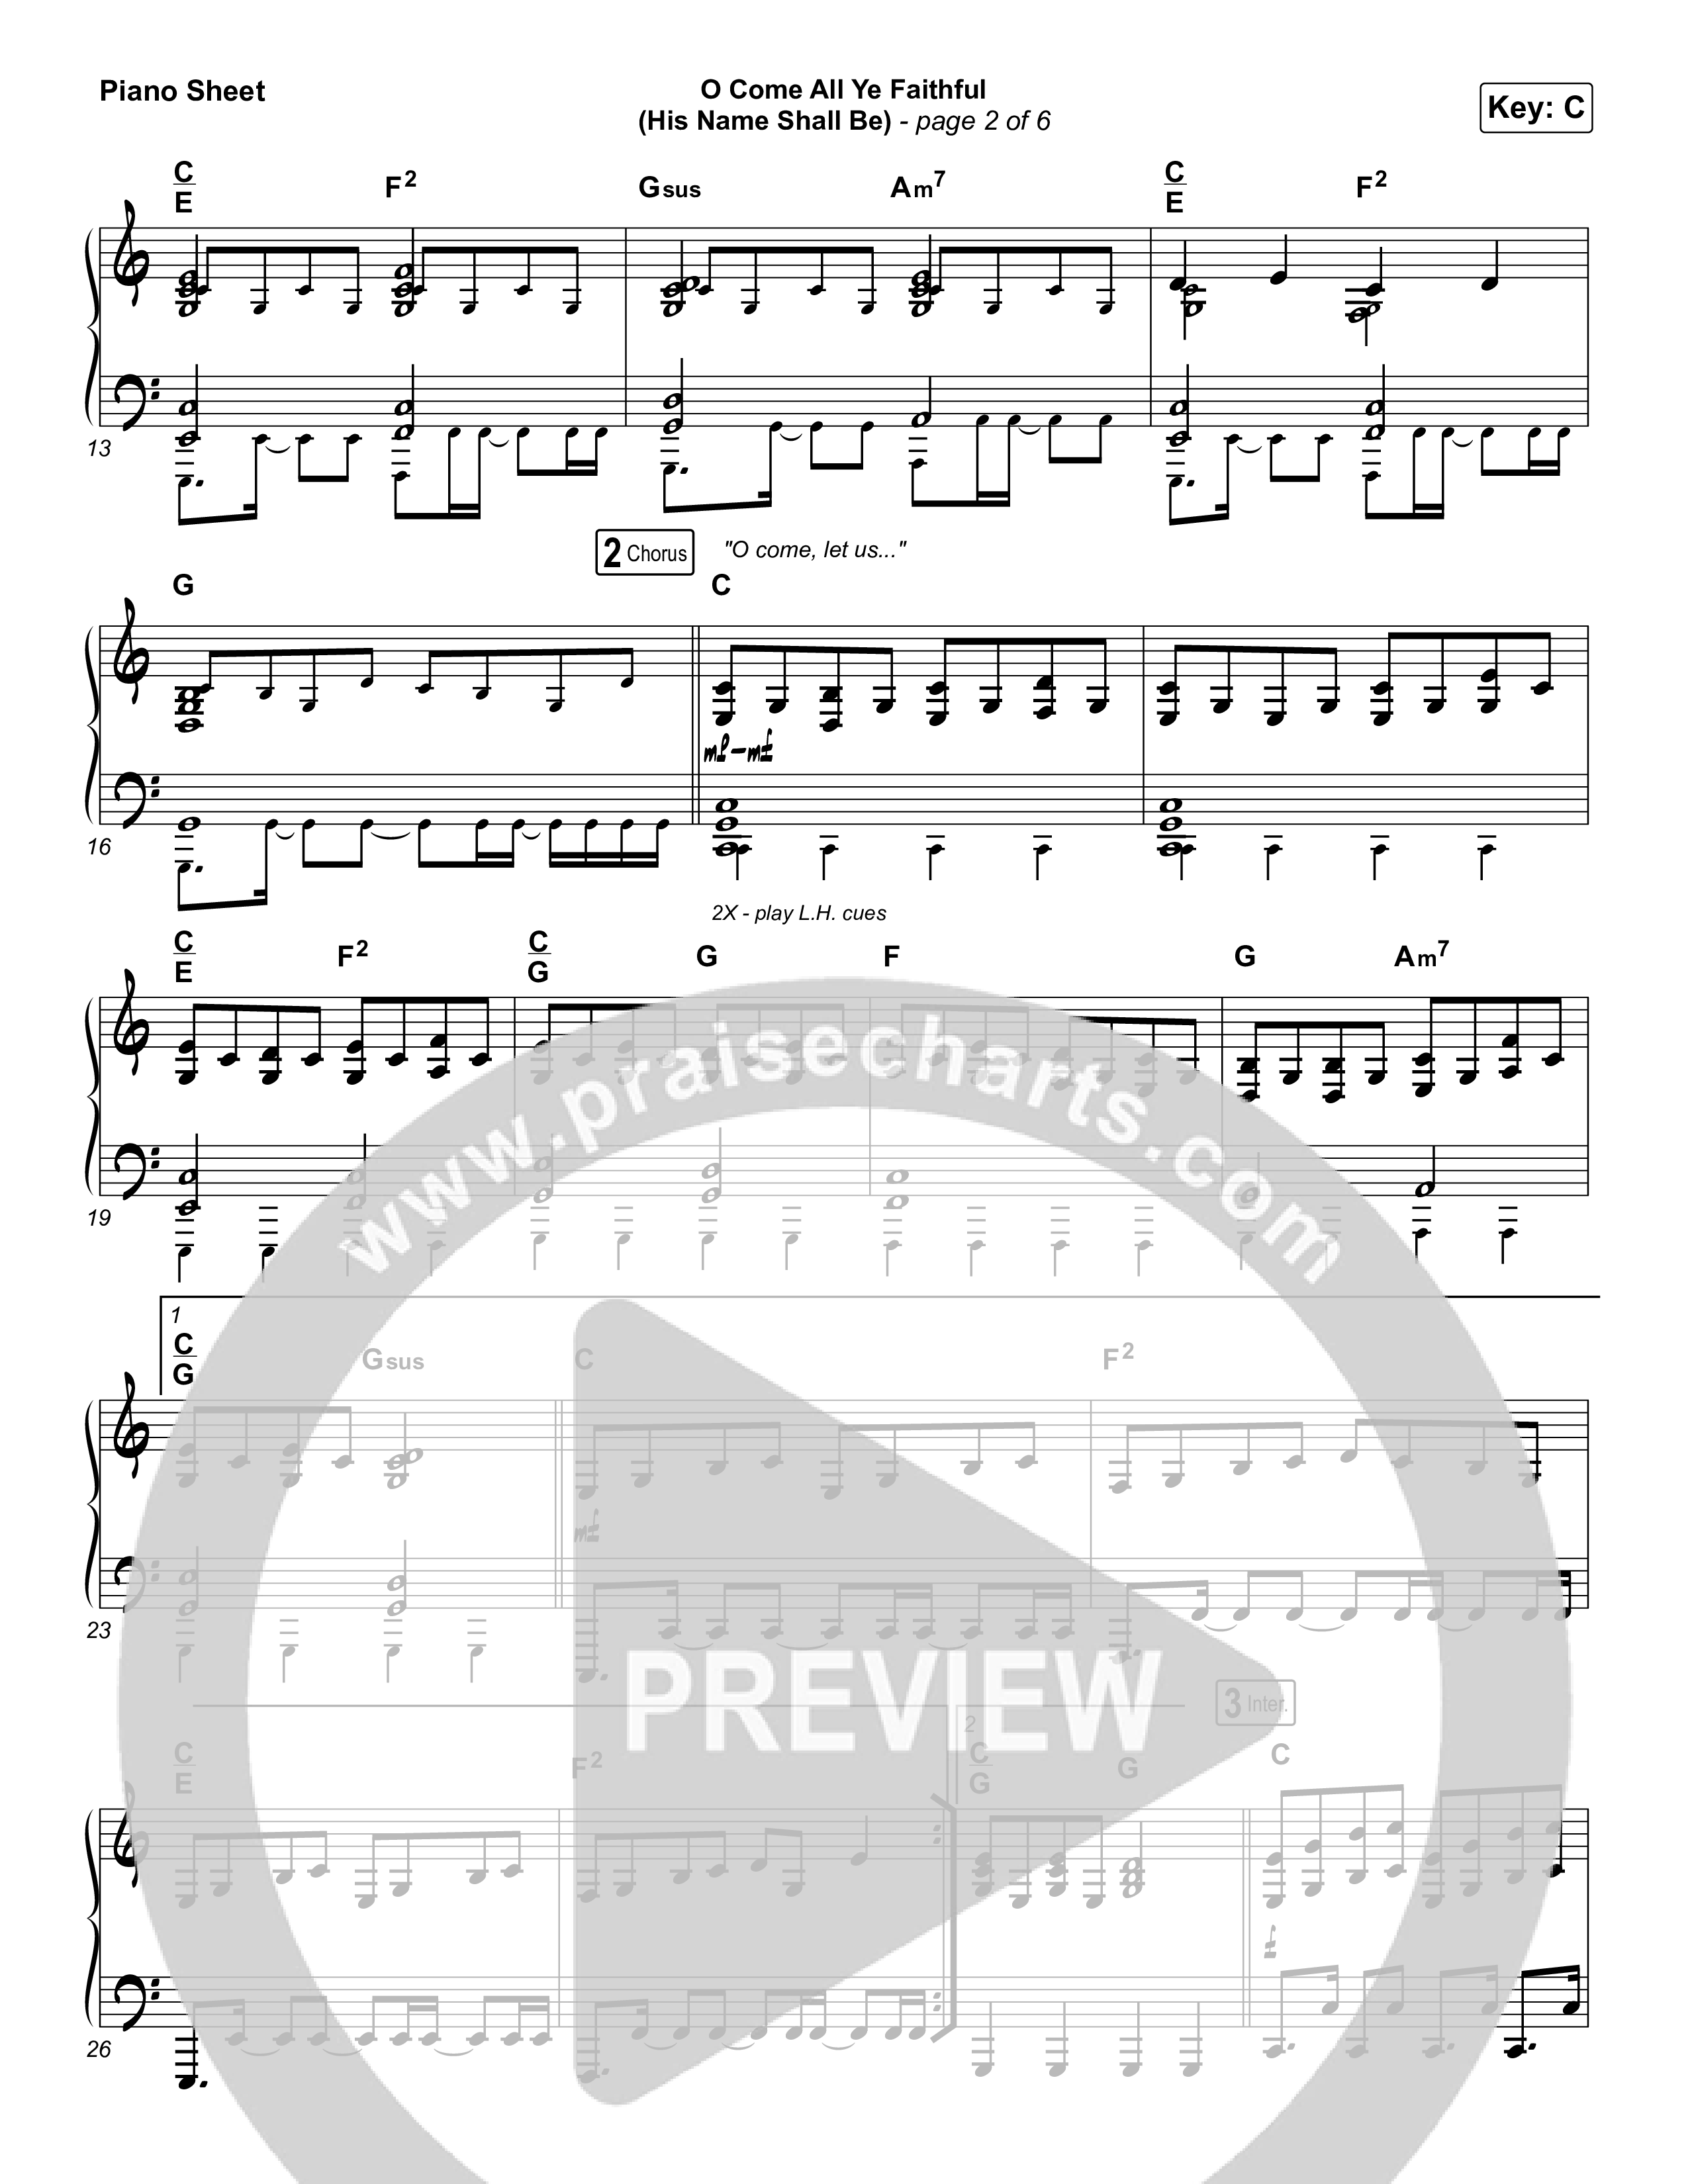 O Come All Ye Faithful (His Name Shall Be) Piano Sheet (Passion / Melodie Malone)